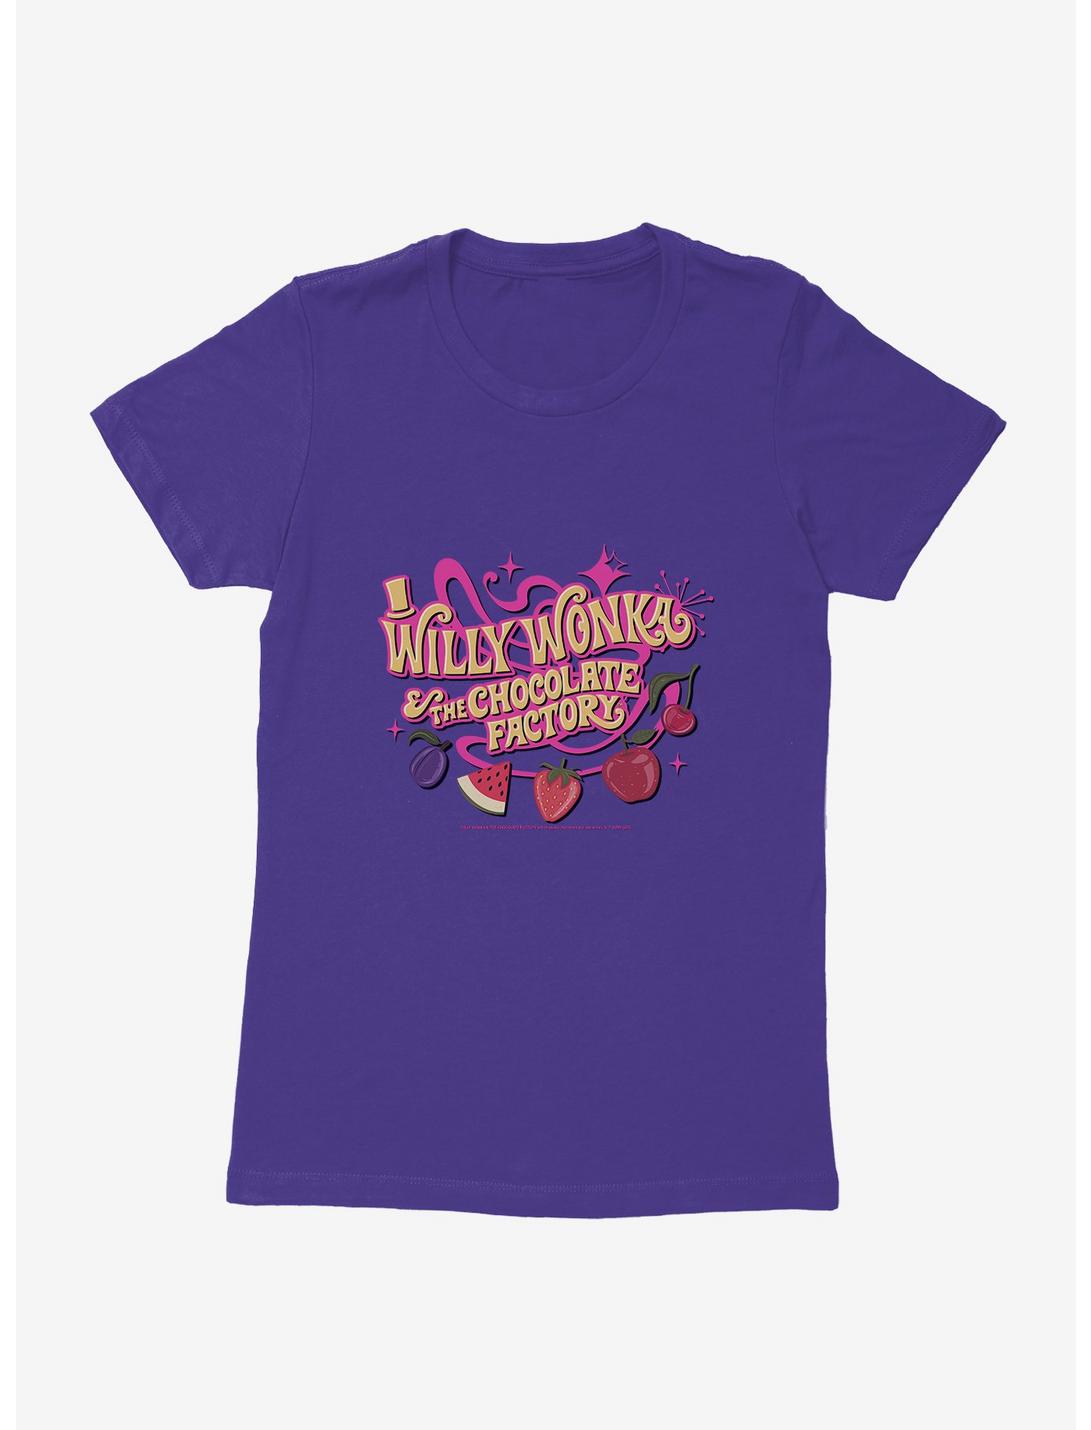 Willy Wonka And The Chocolate Factory Snozzberries Taste Like Snozzberries Womens T-Shirt, , hi-res